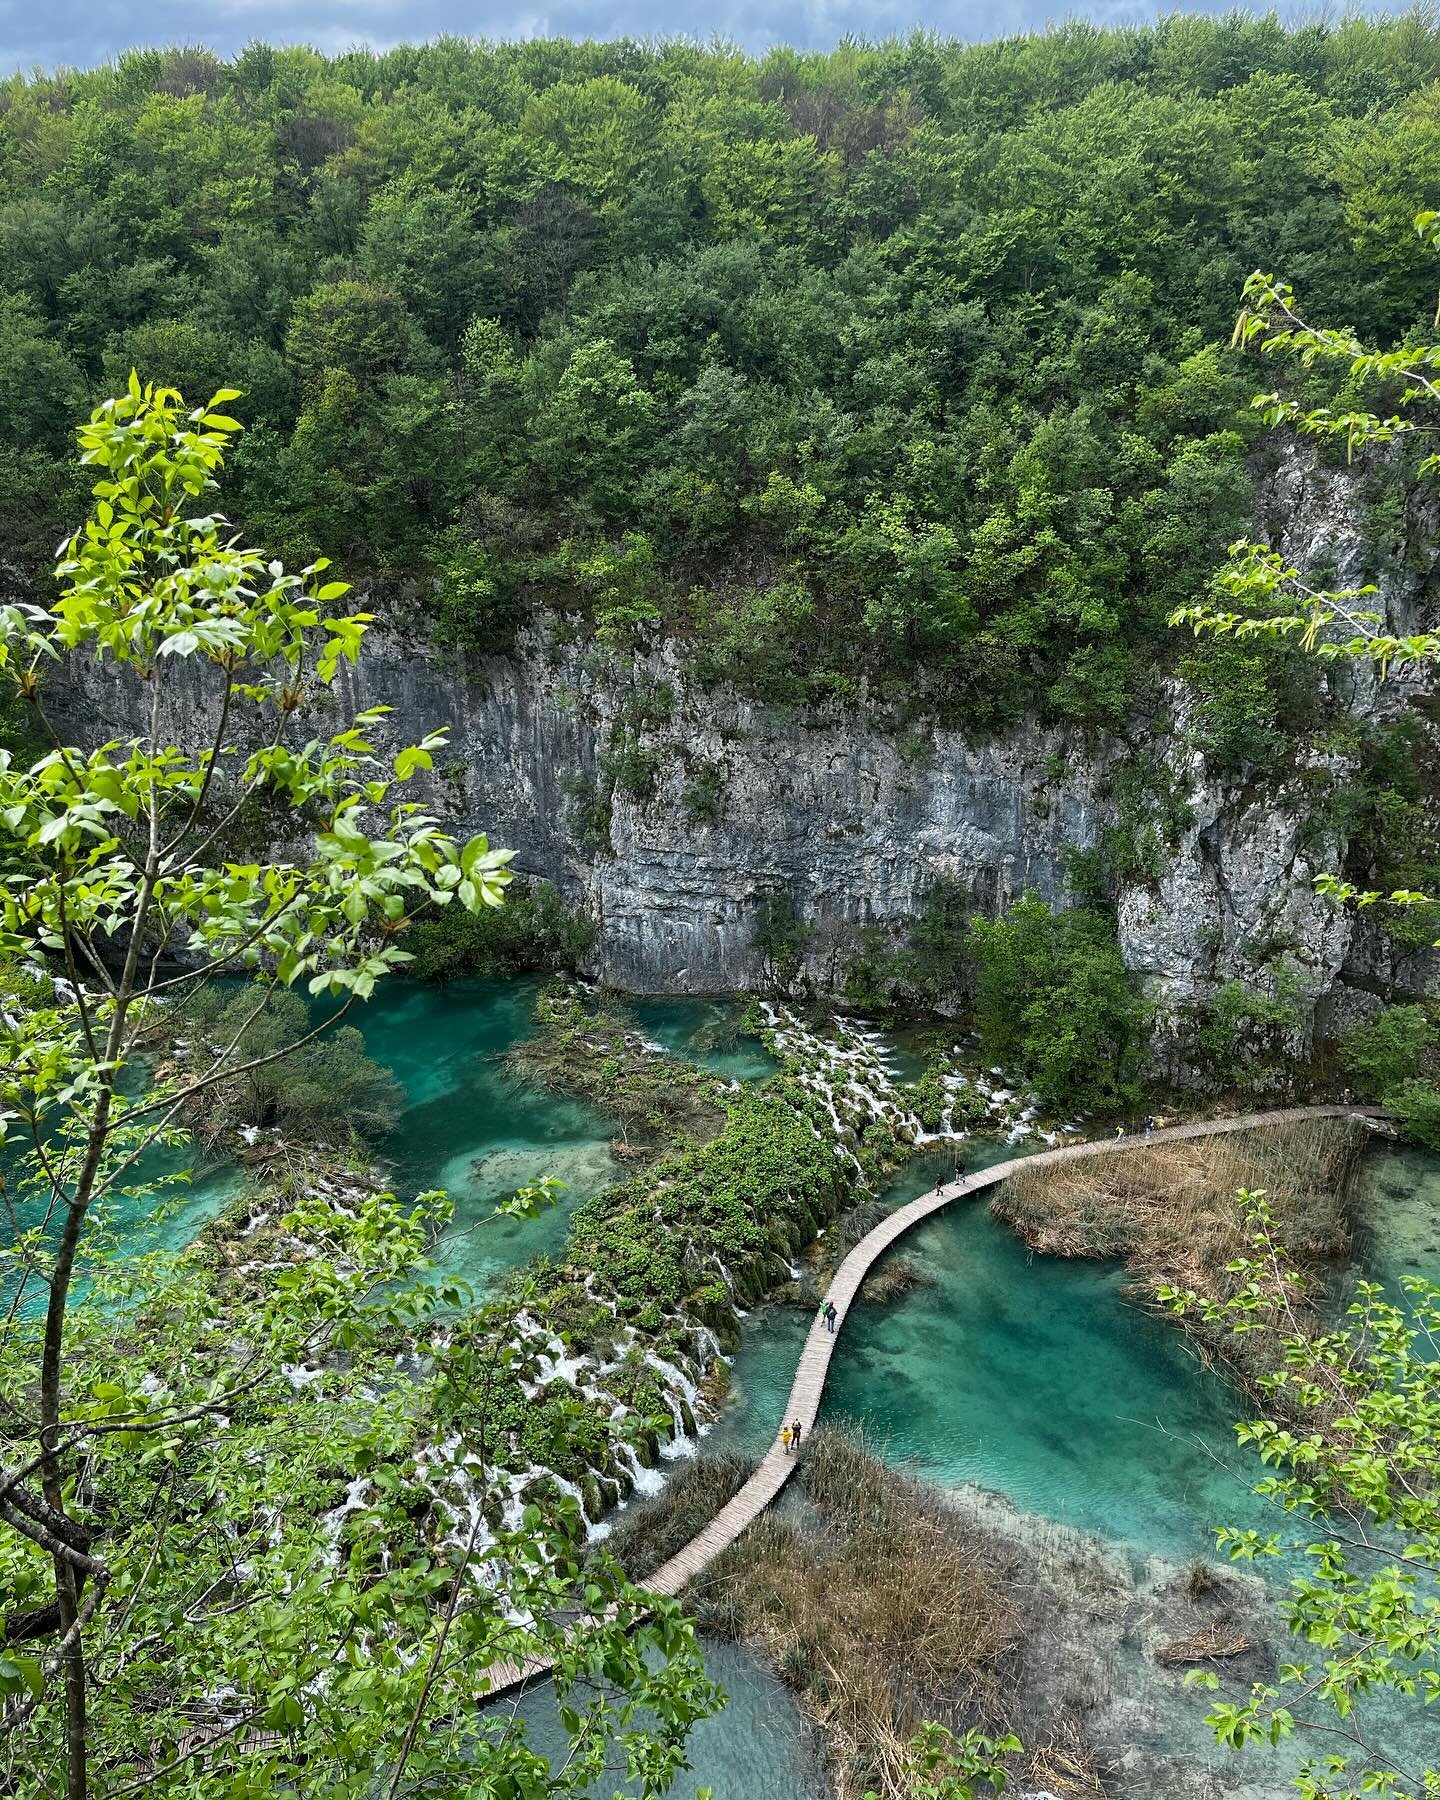 Plitvice National Park | one of the oldest and largest National Parks in Croatia, and an absolute must see. 🔆

I know there are some national park fanatics out here, so add this one to your list! 

I must know ➡️ What is your favorite National Park 